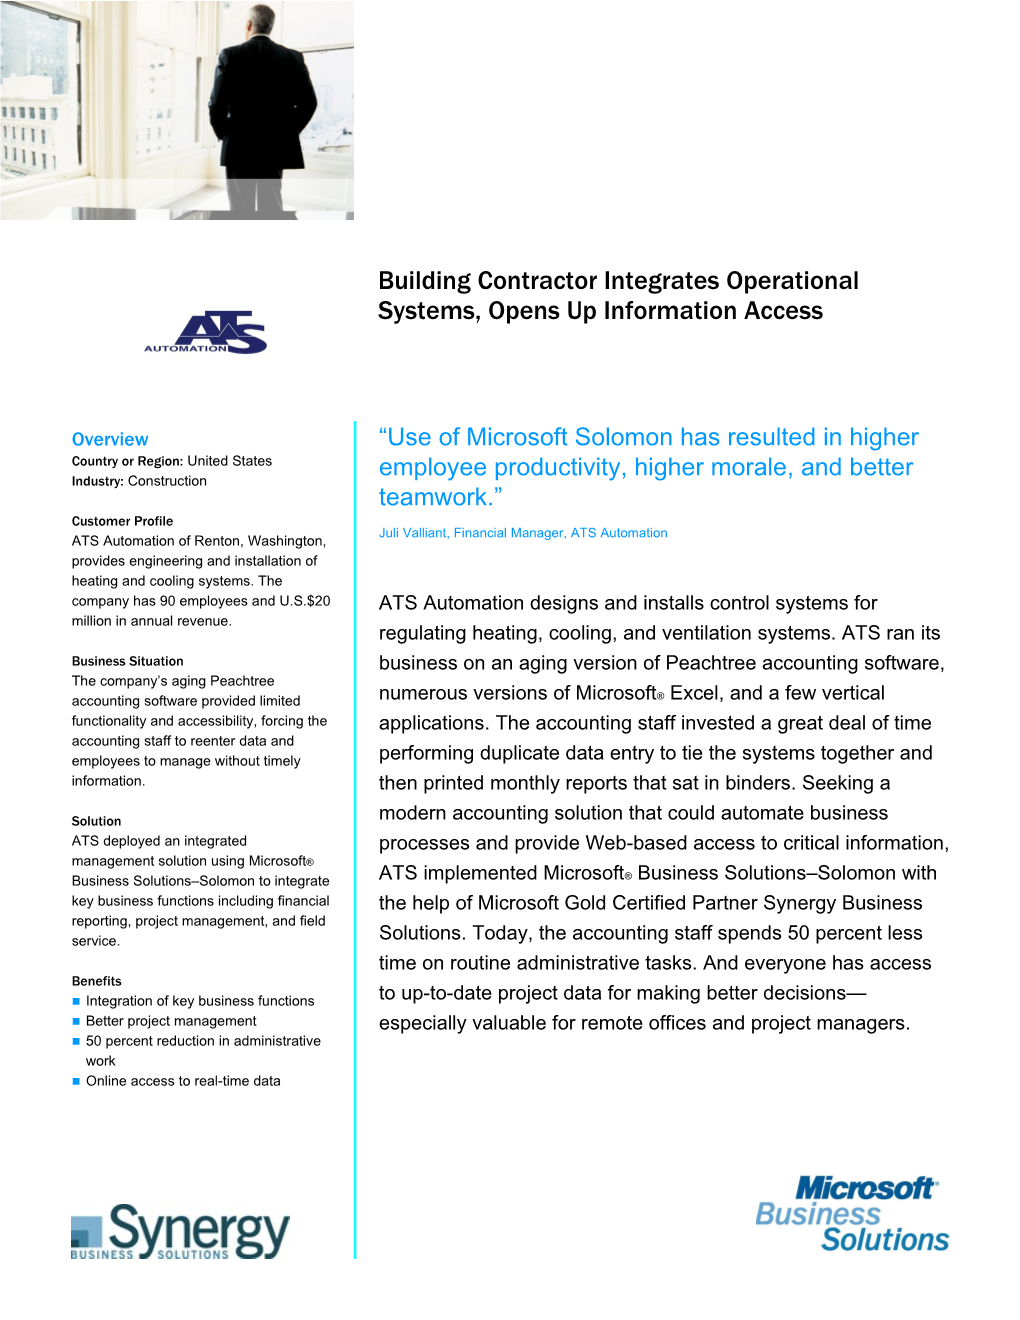 Building Contractor Integrates Operational Systems, Opens up Information Access